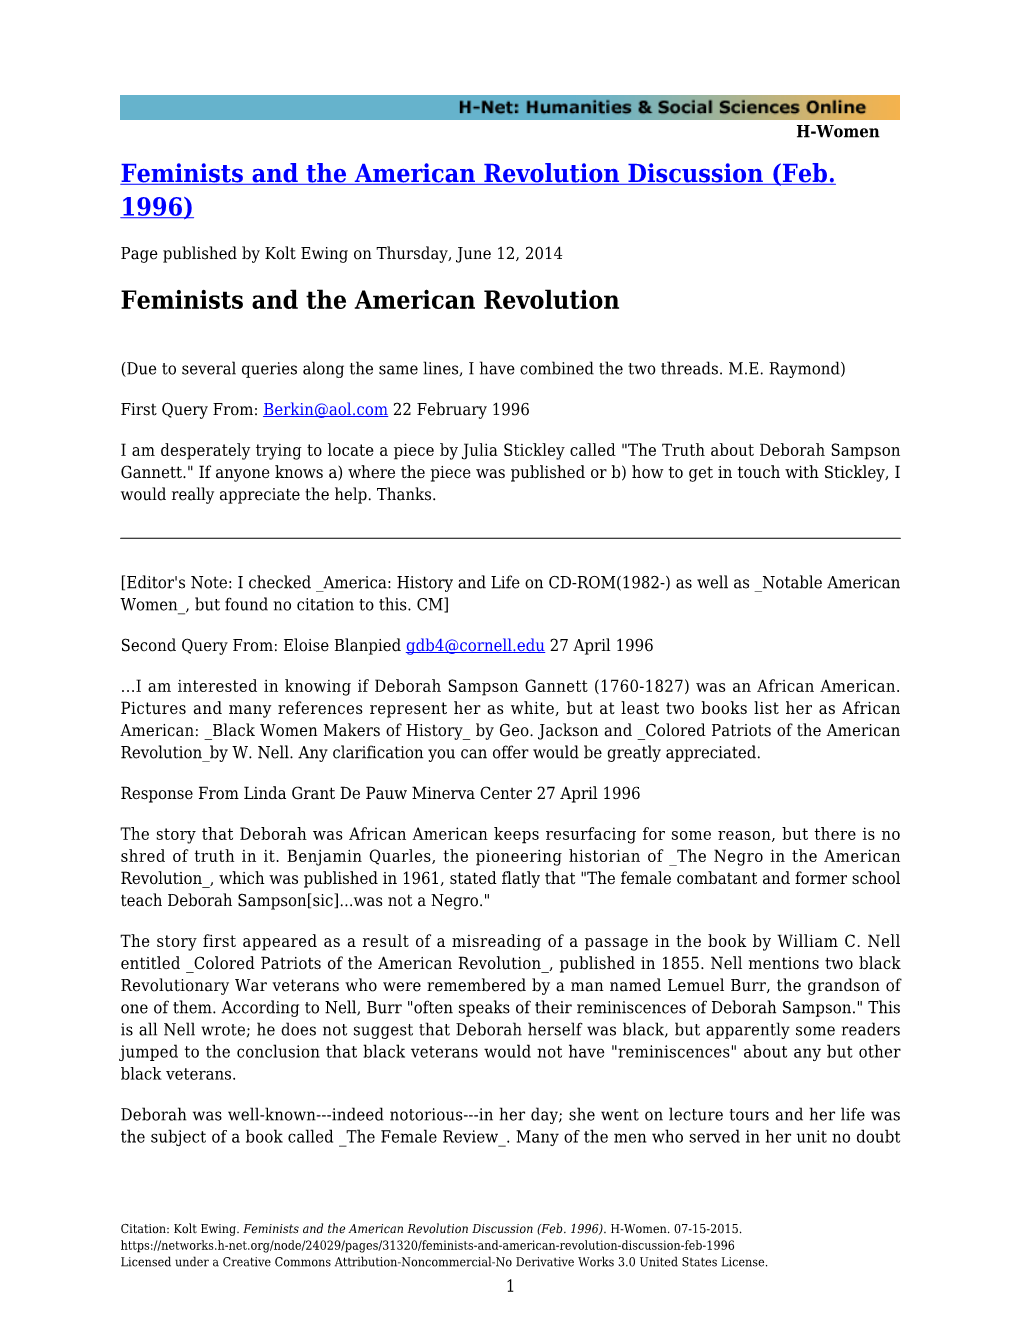 Feminists and the American Revolution Discussion (Feb